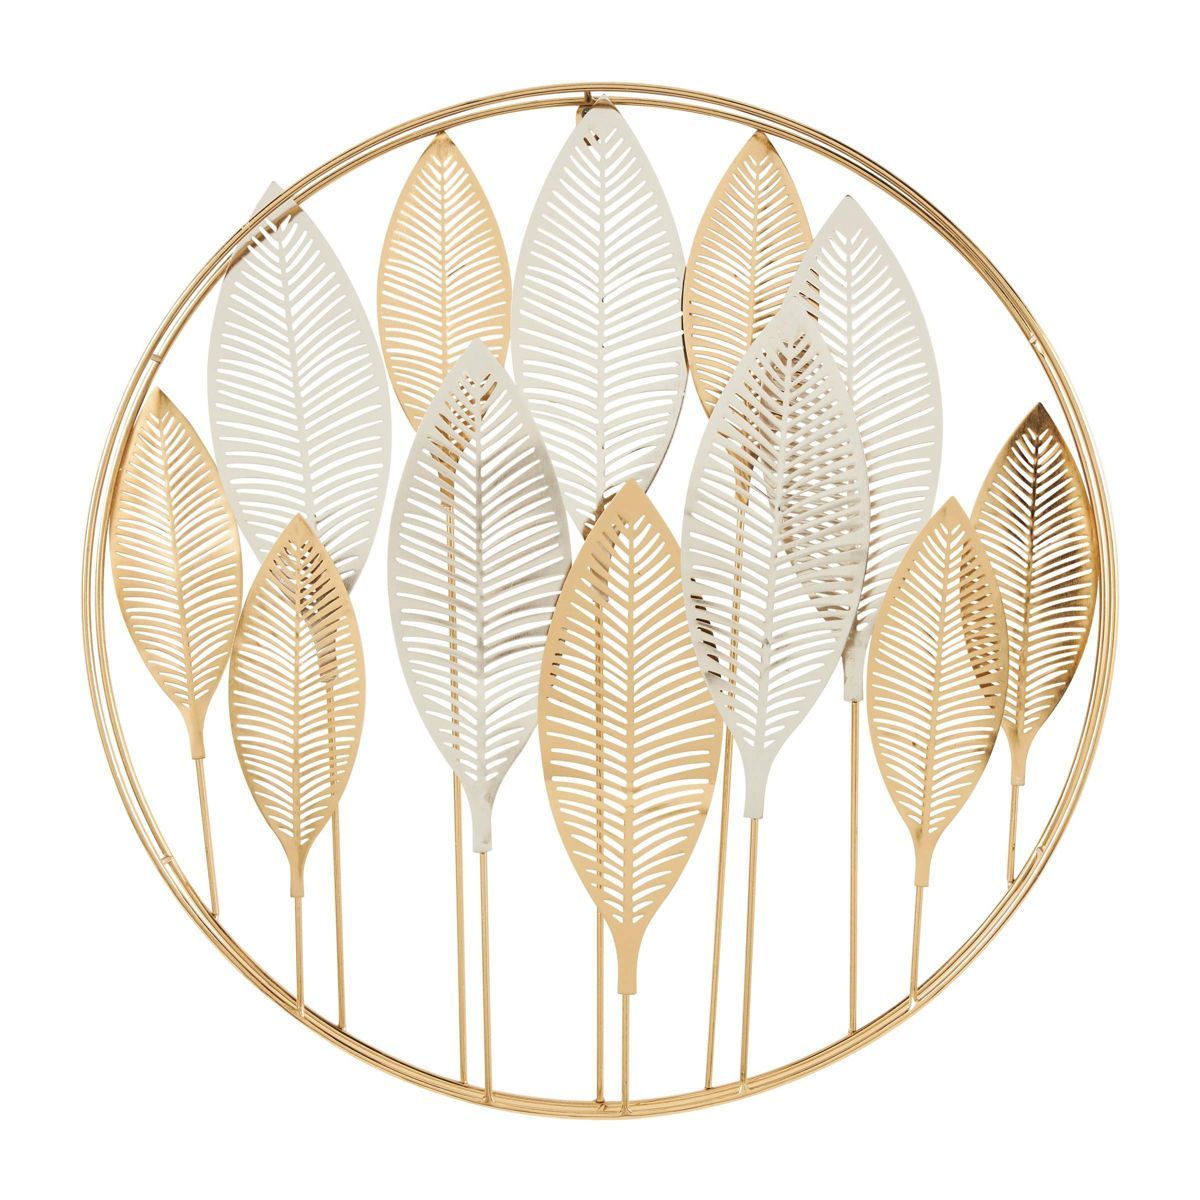 26"x26" Metal Leaf Metallic Wall Decor with Circular Frame and Silver Accents Gold - Olivia & May | Target